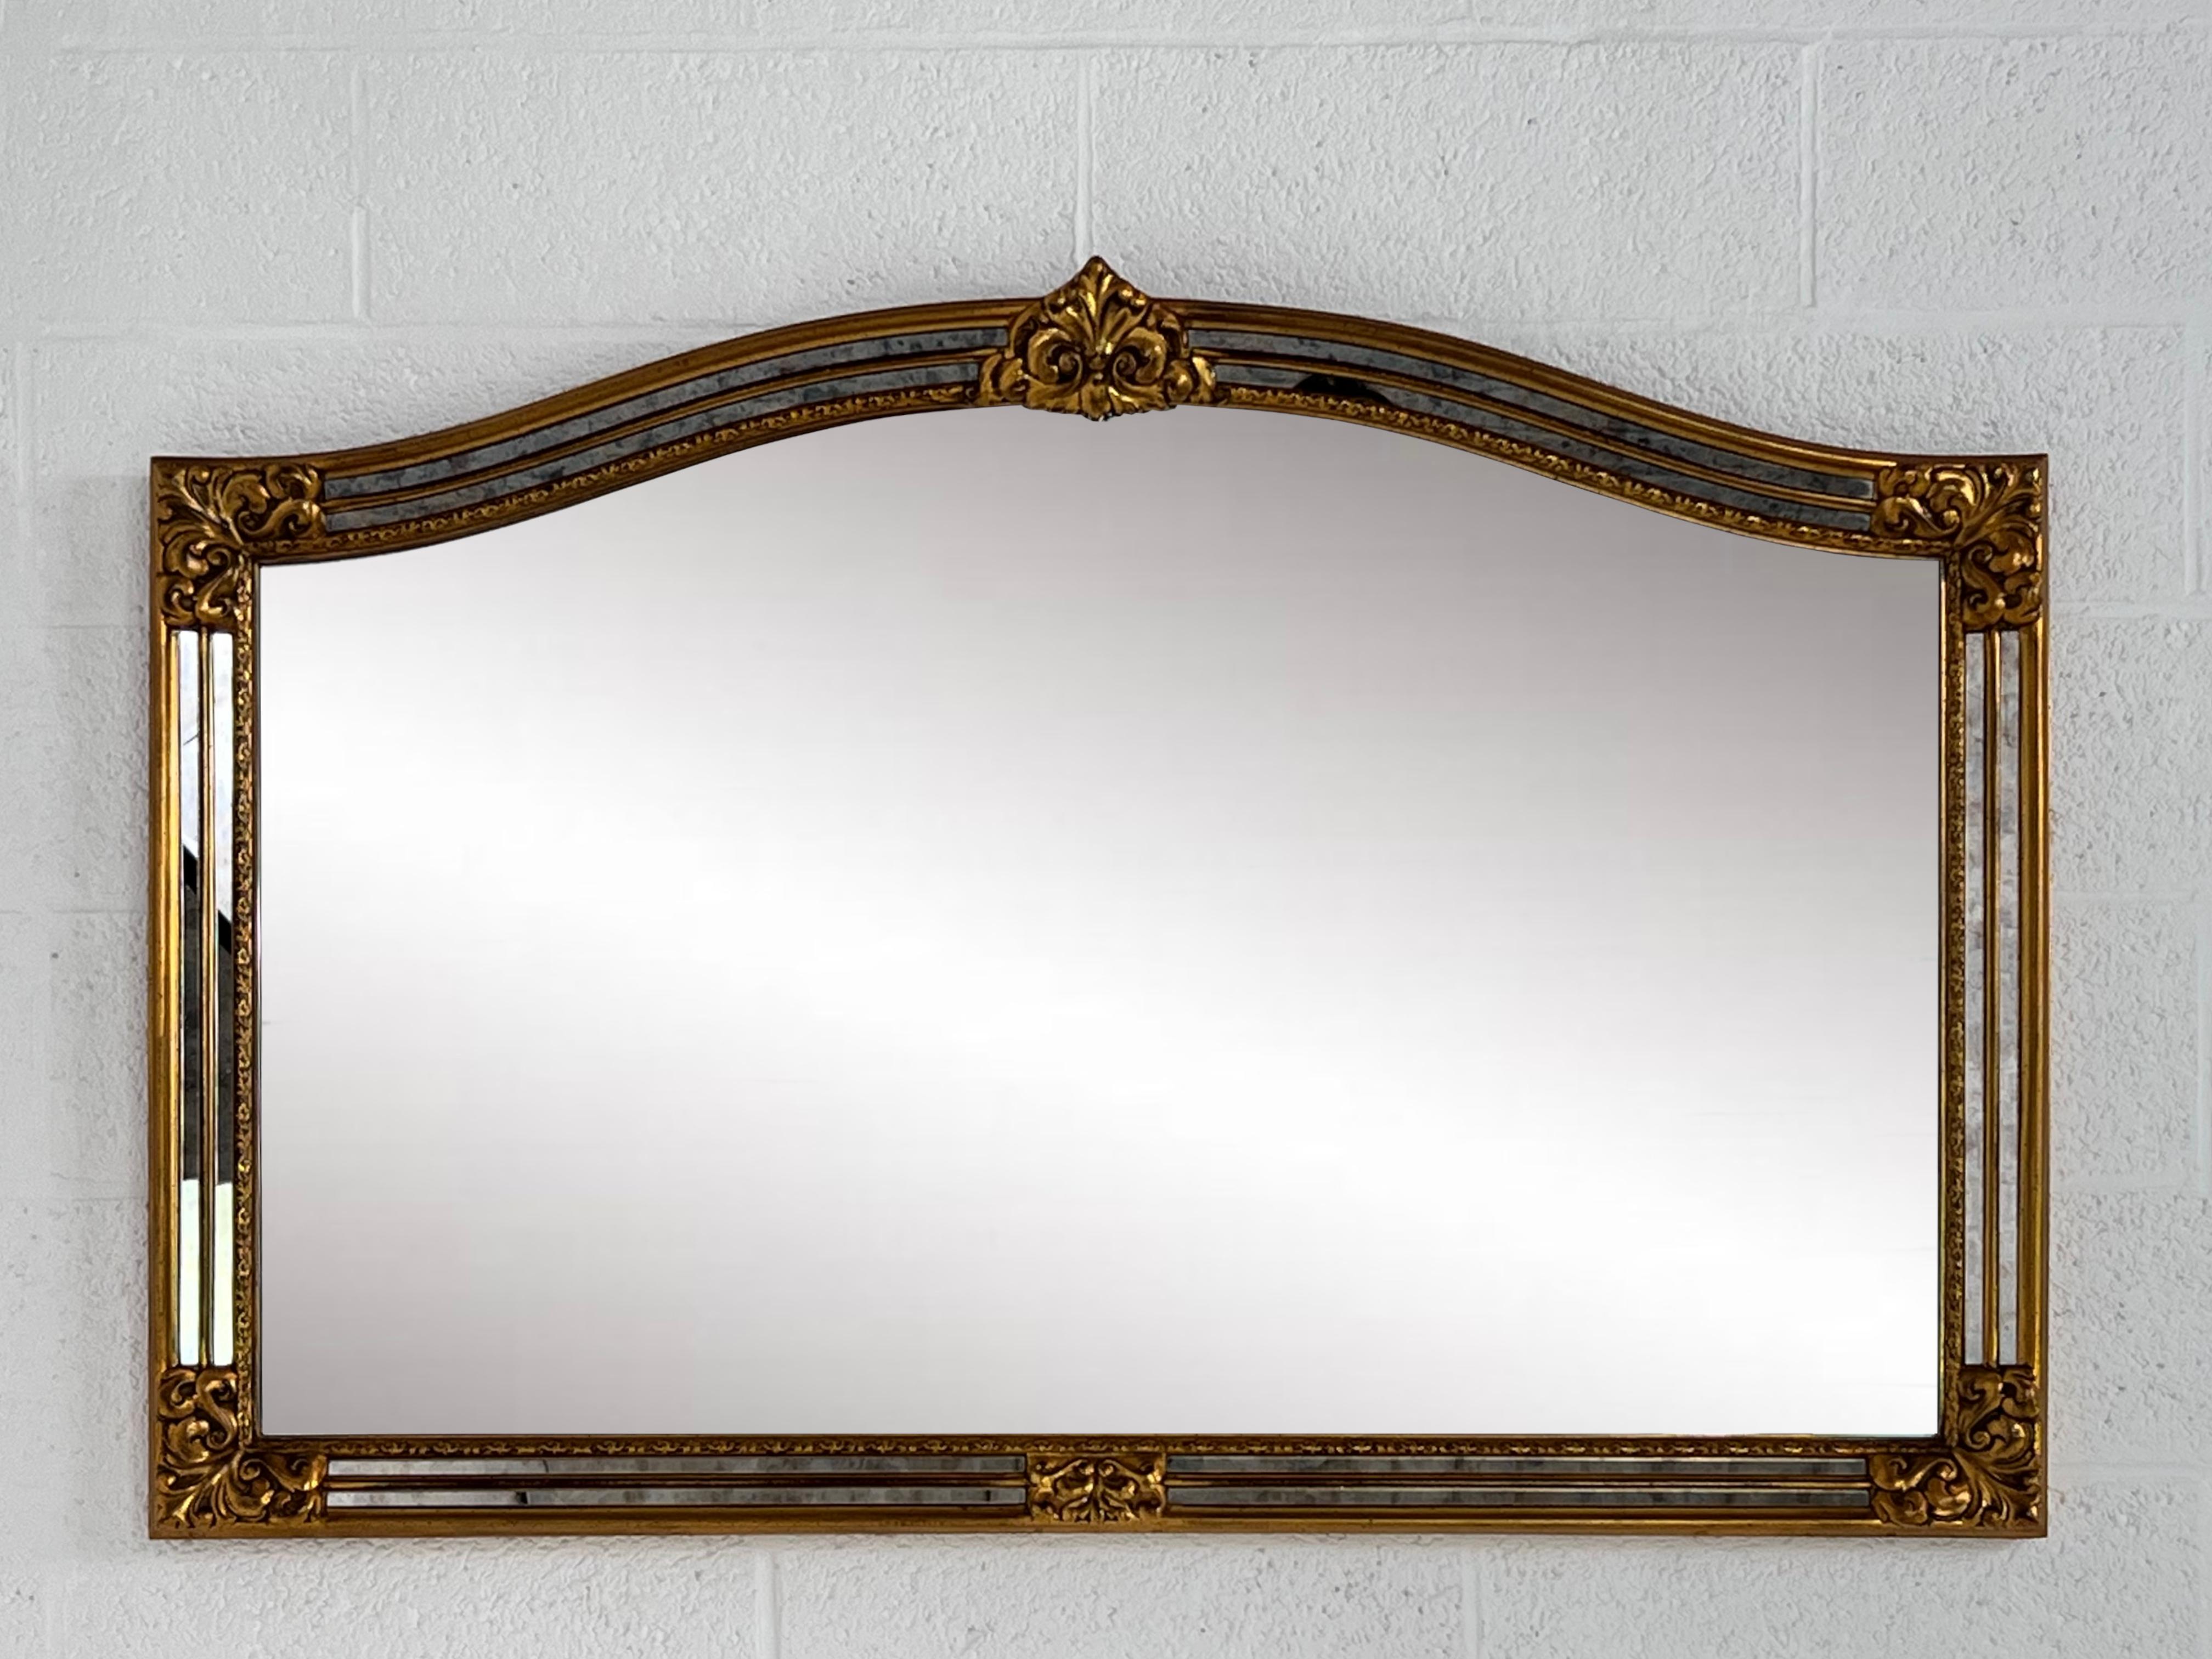 Large mirror with high-quality craftmanship. It imposes by its size but also by the quality of its manufacture. In perfect condition.